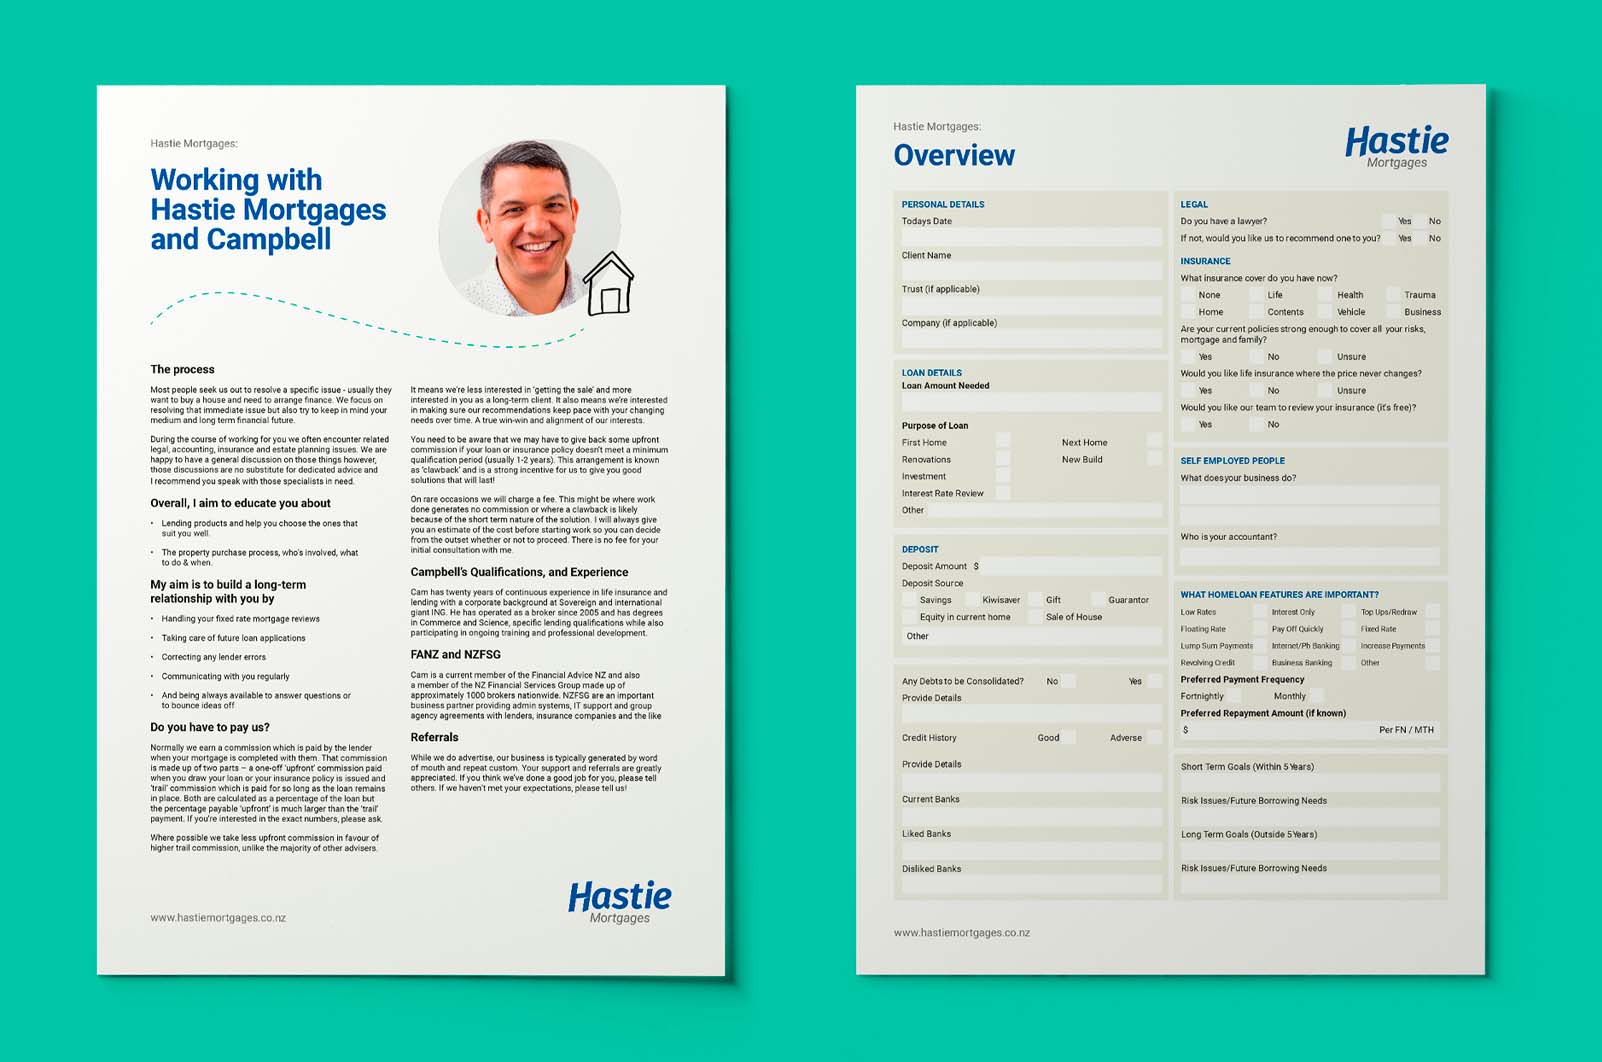 Hastie Mortgages New Brand Identity – Case Study-image3 